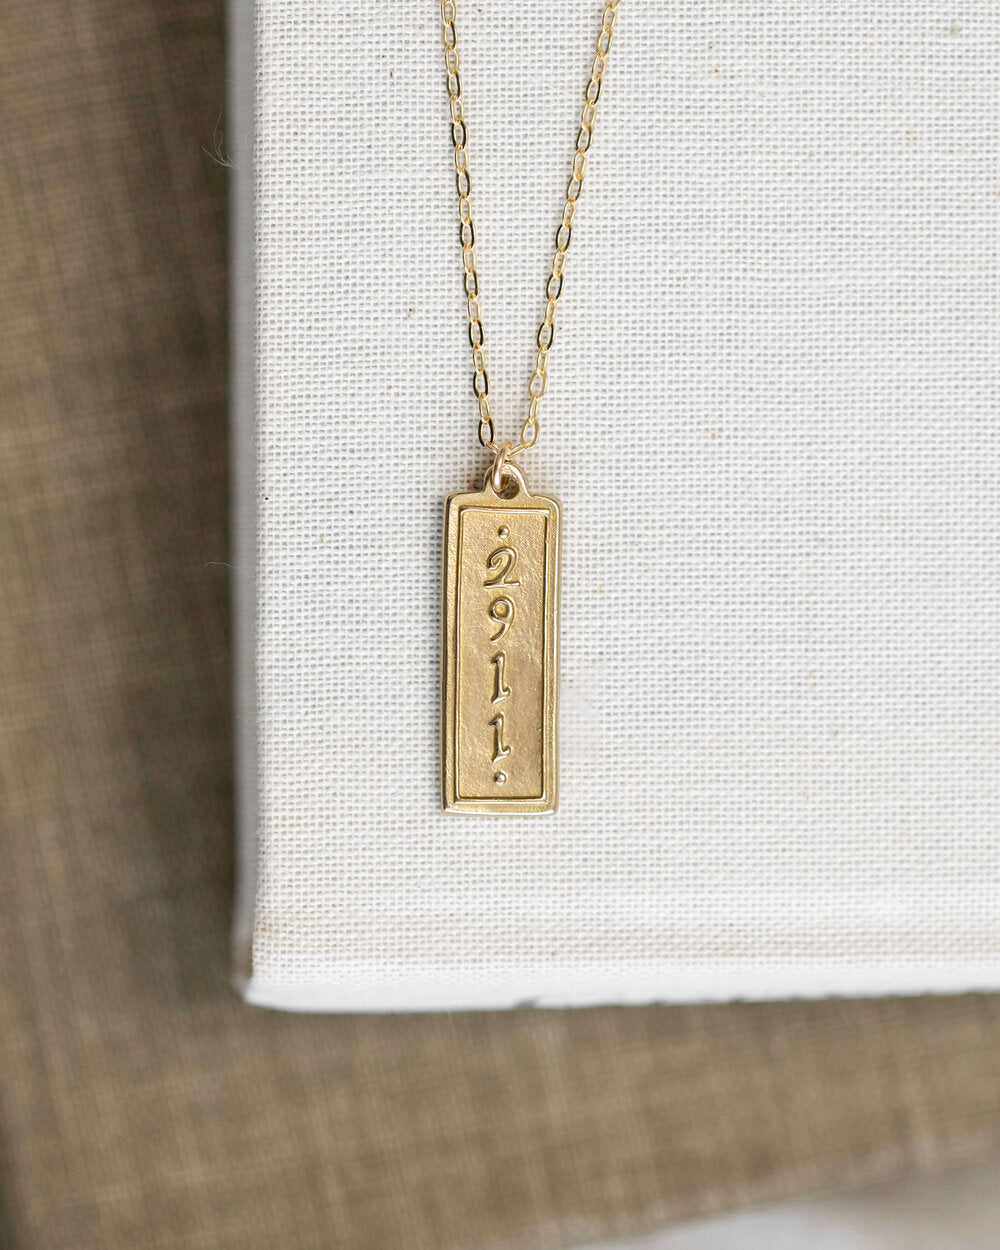 Madison Sterling: Jeremiah 29:11 Necklace